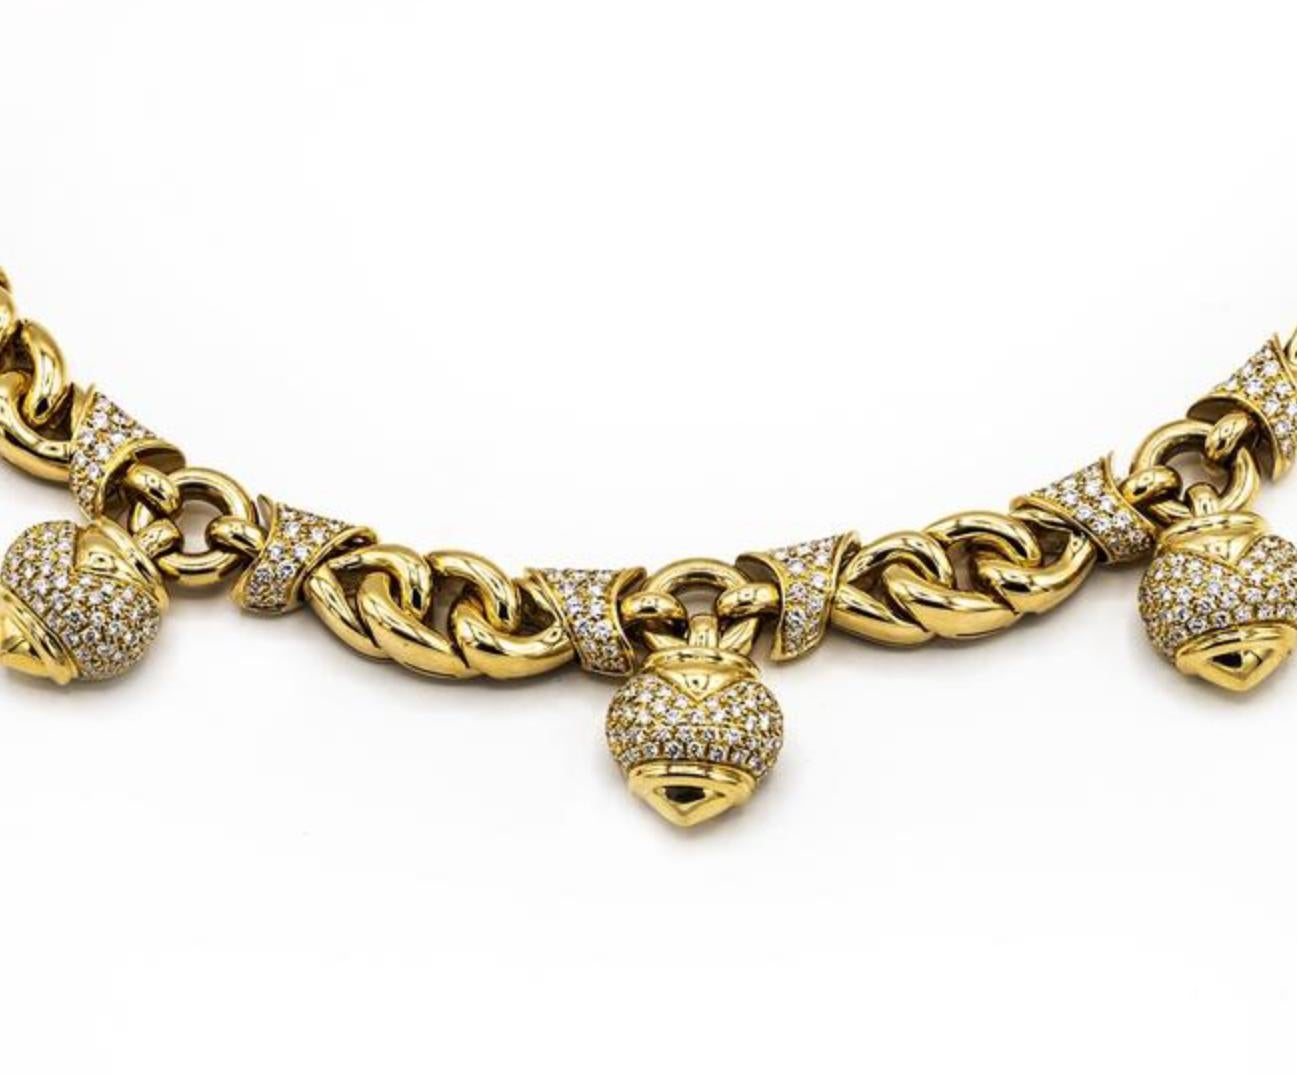 A stylish Bulgari 18 karat gold yellow necklace with heart pendants from the Doppio Cuore collection. Embellished with 320 round brilliant diamonds totaling approximately 5.25 carats, measuring 17 inches long. Made in Italy, circa 1980.